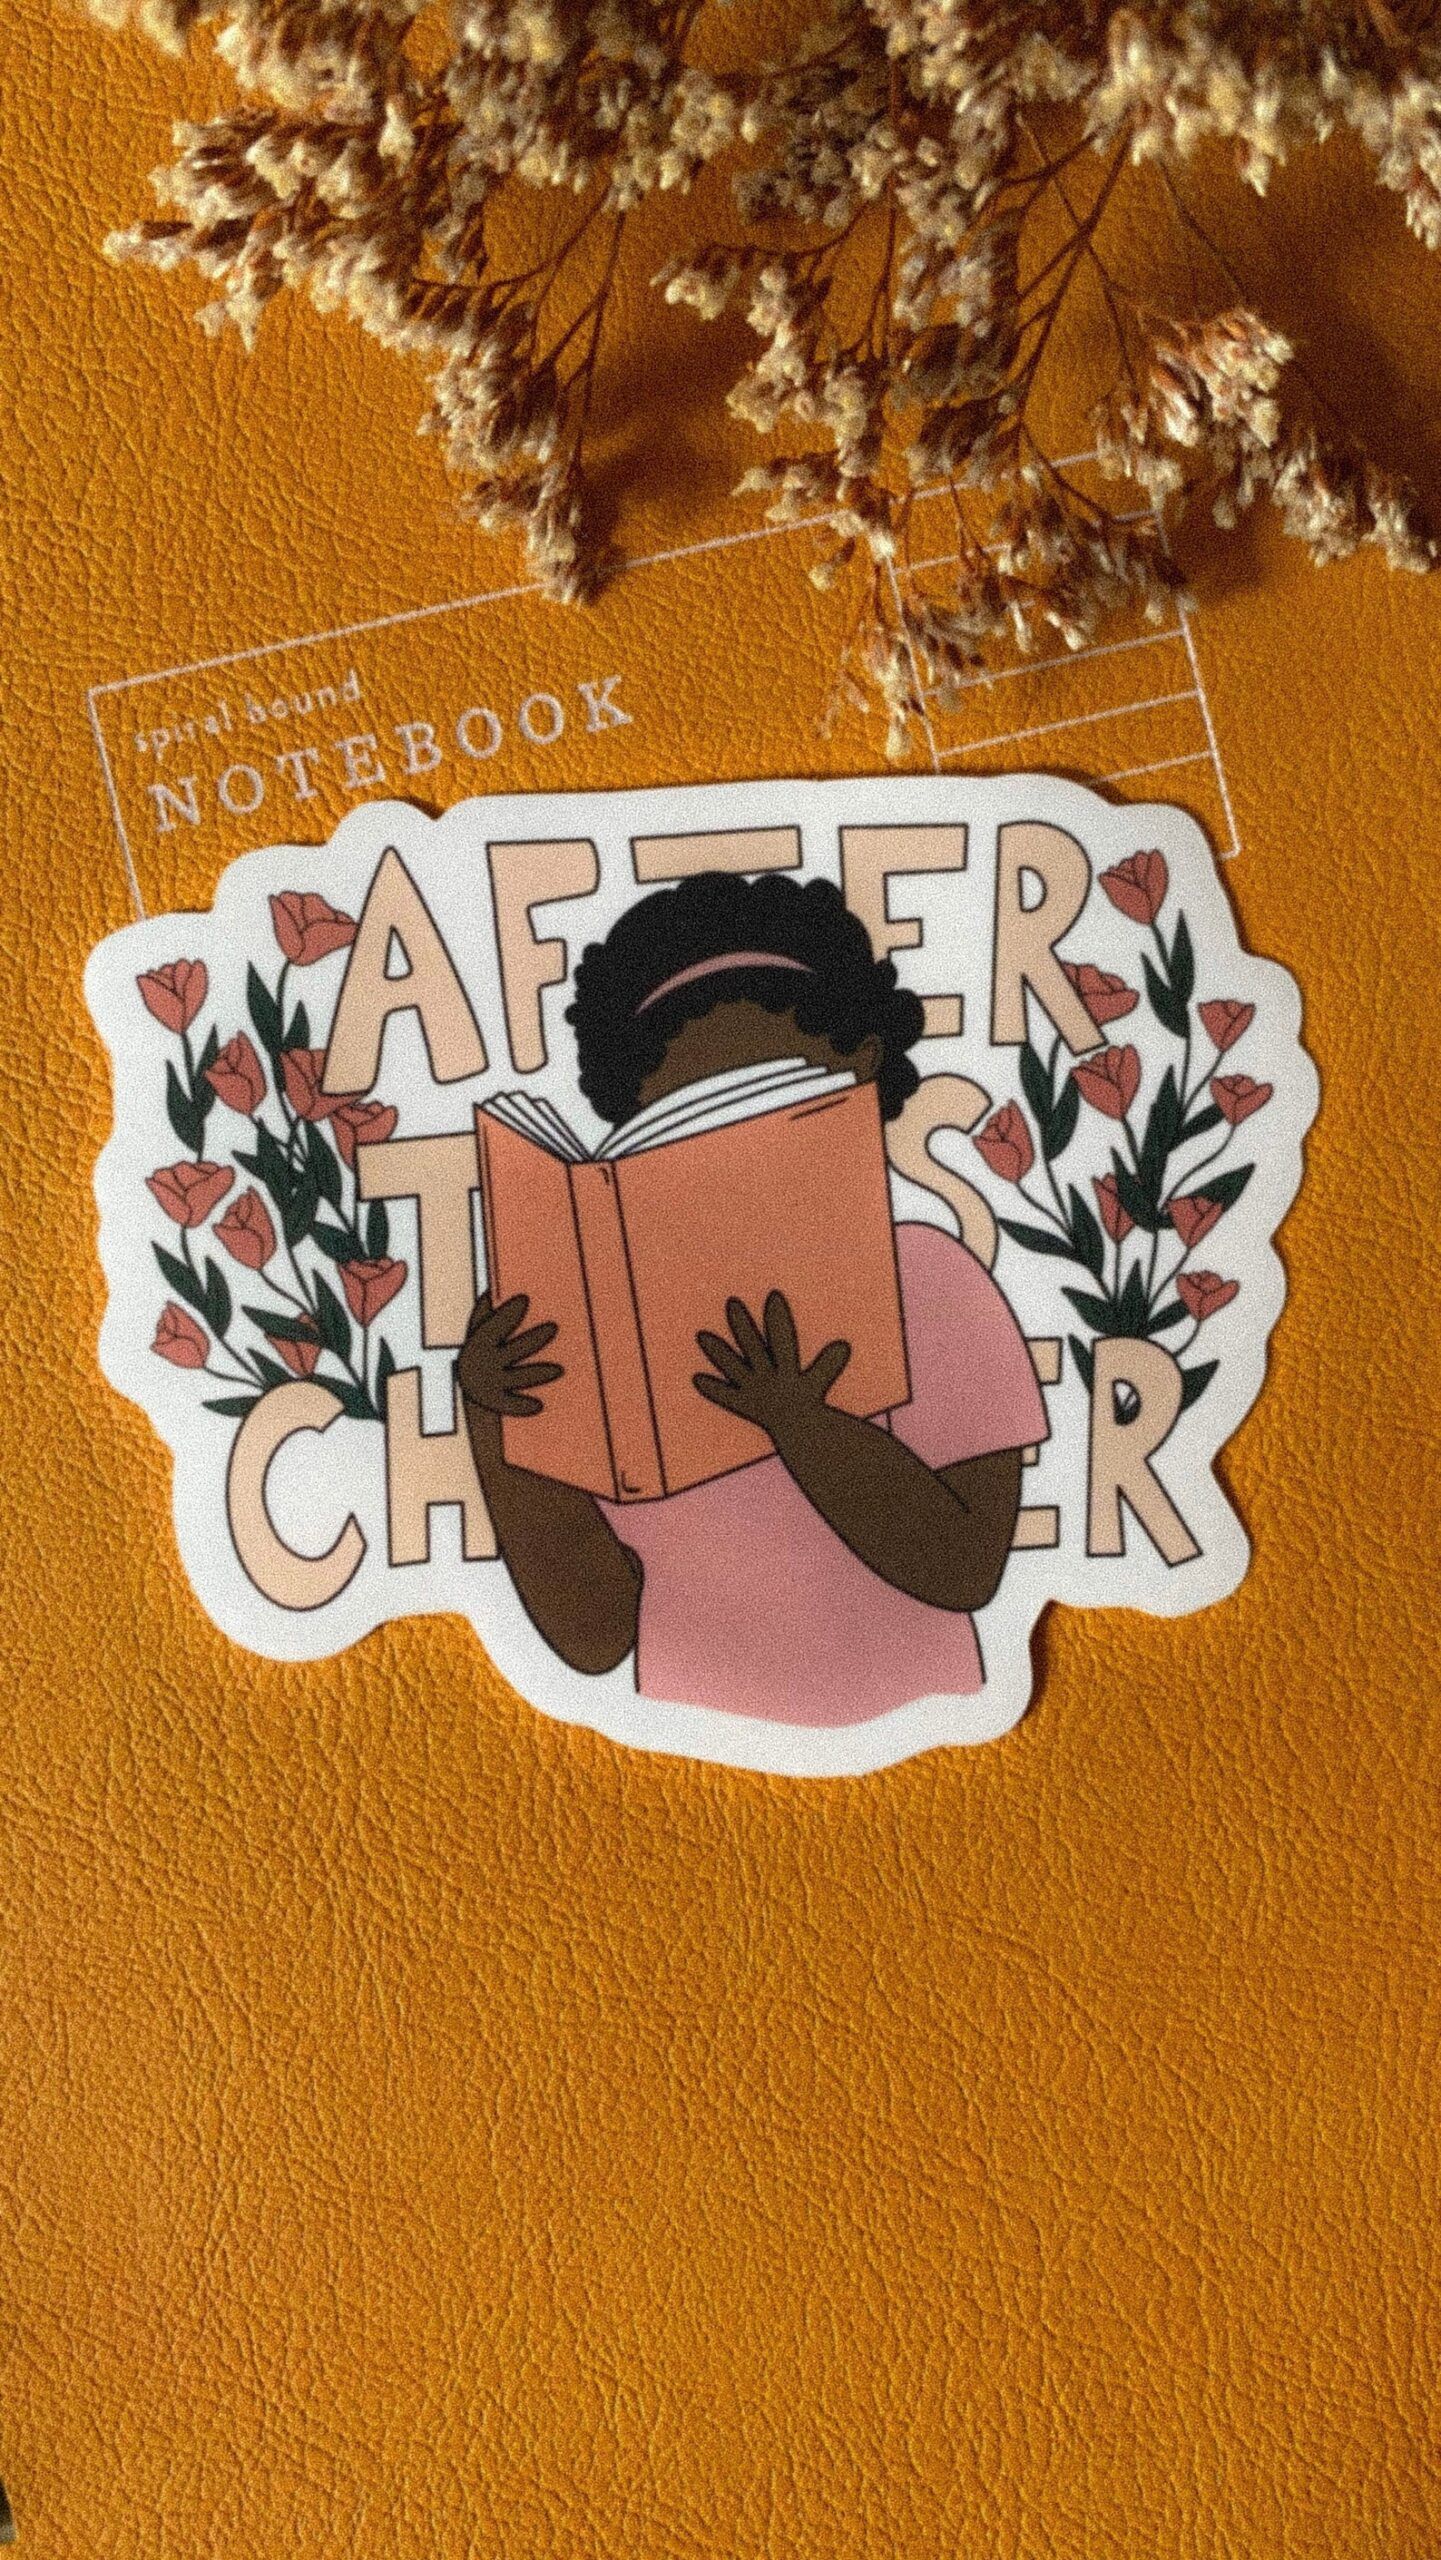 Image of a sticker featuring a Black reader with an open book. Behind the reader are the words "after this chapter," also in pink. 